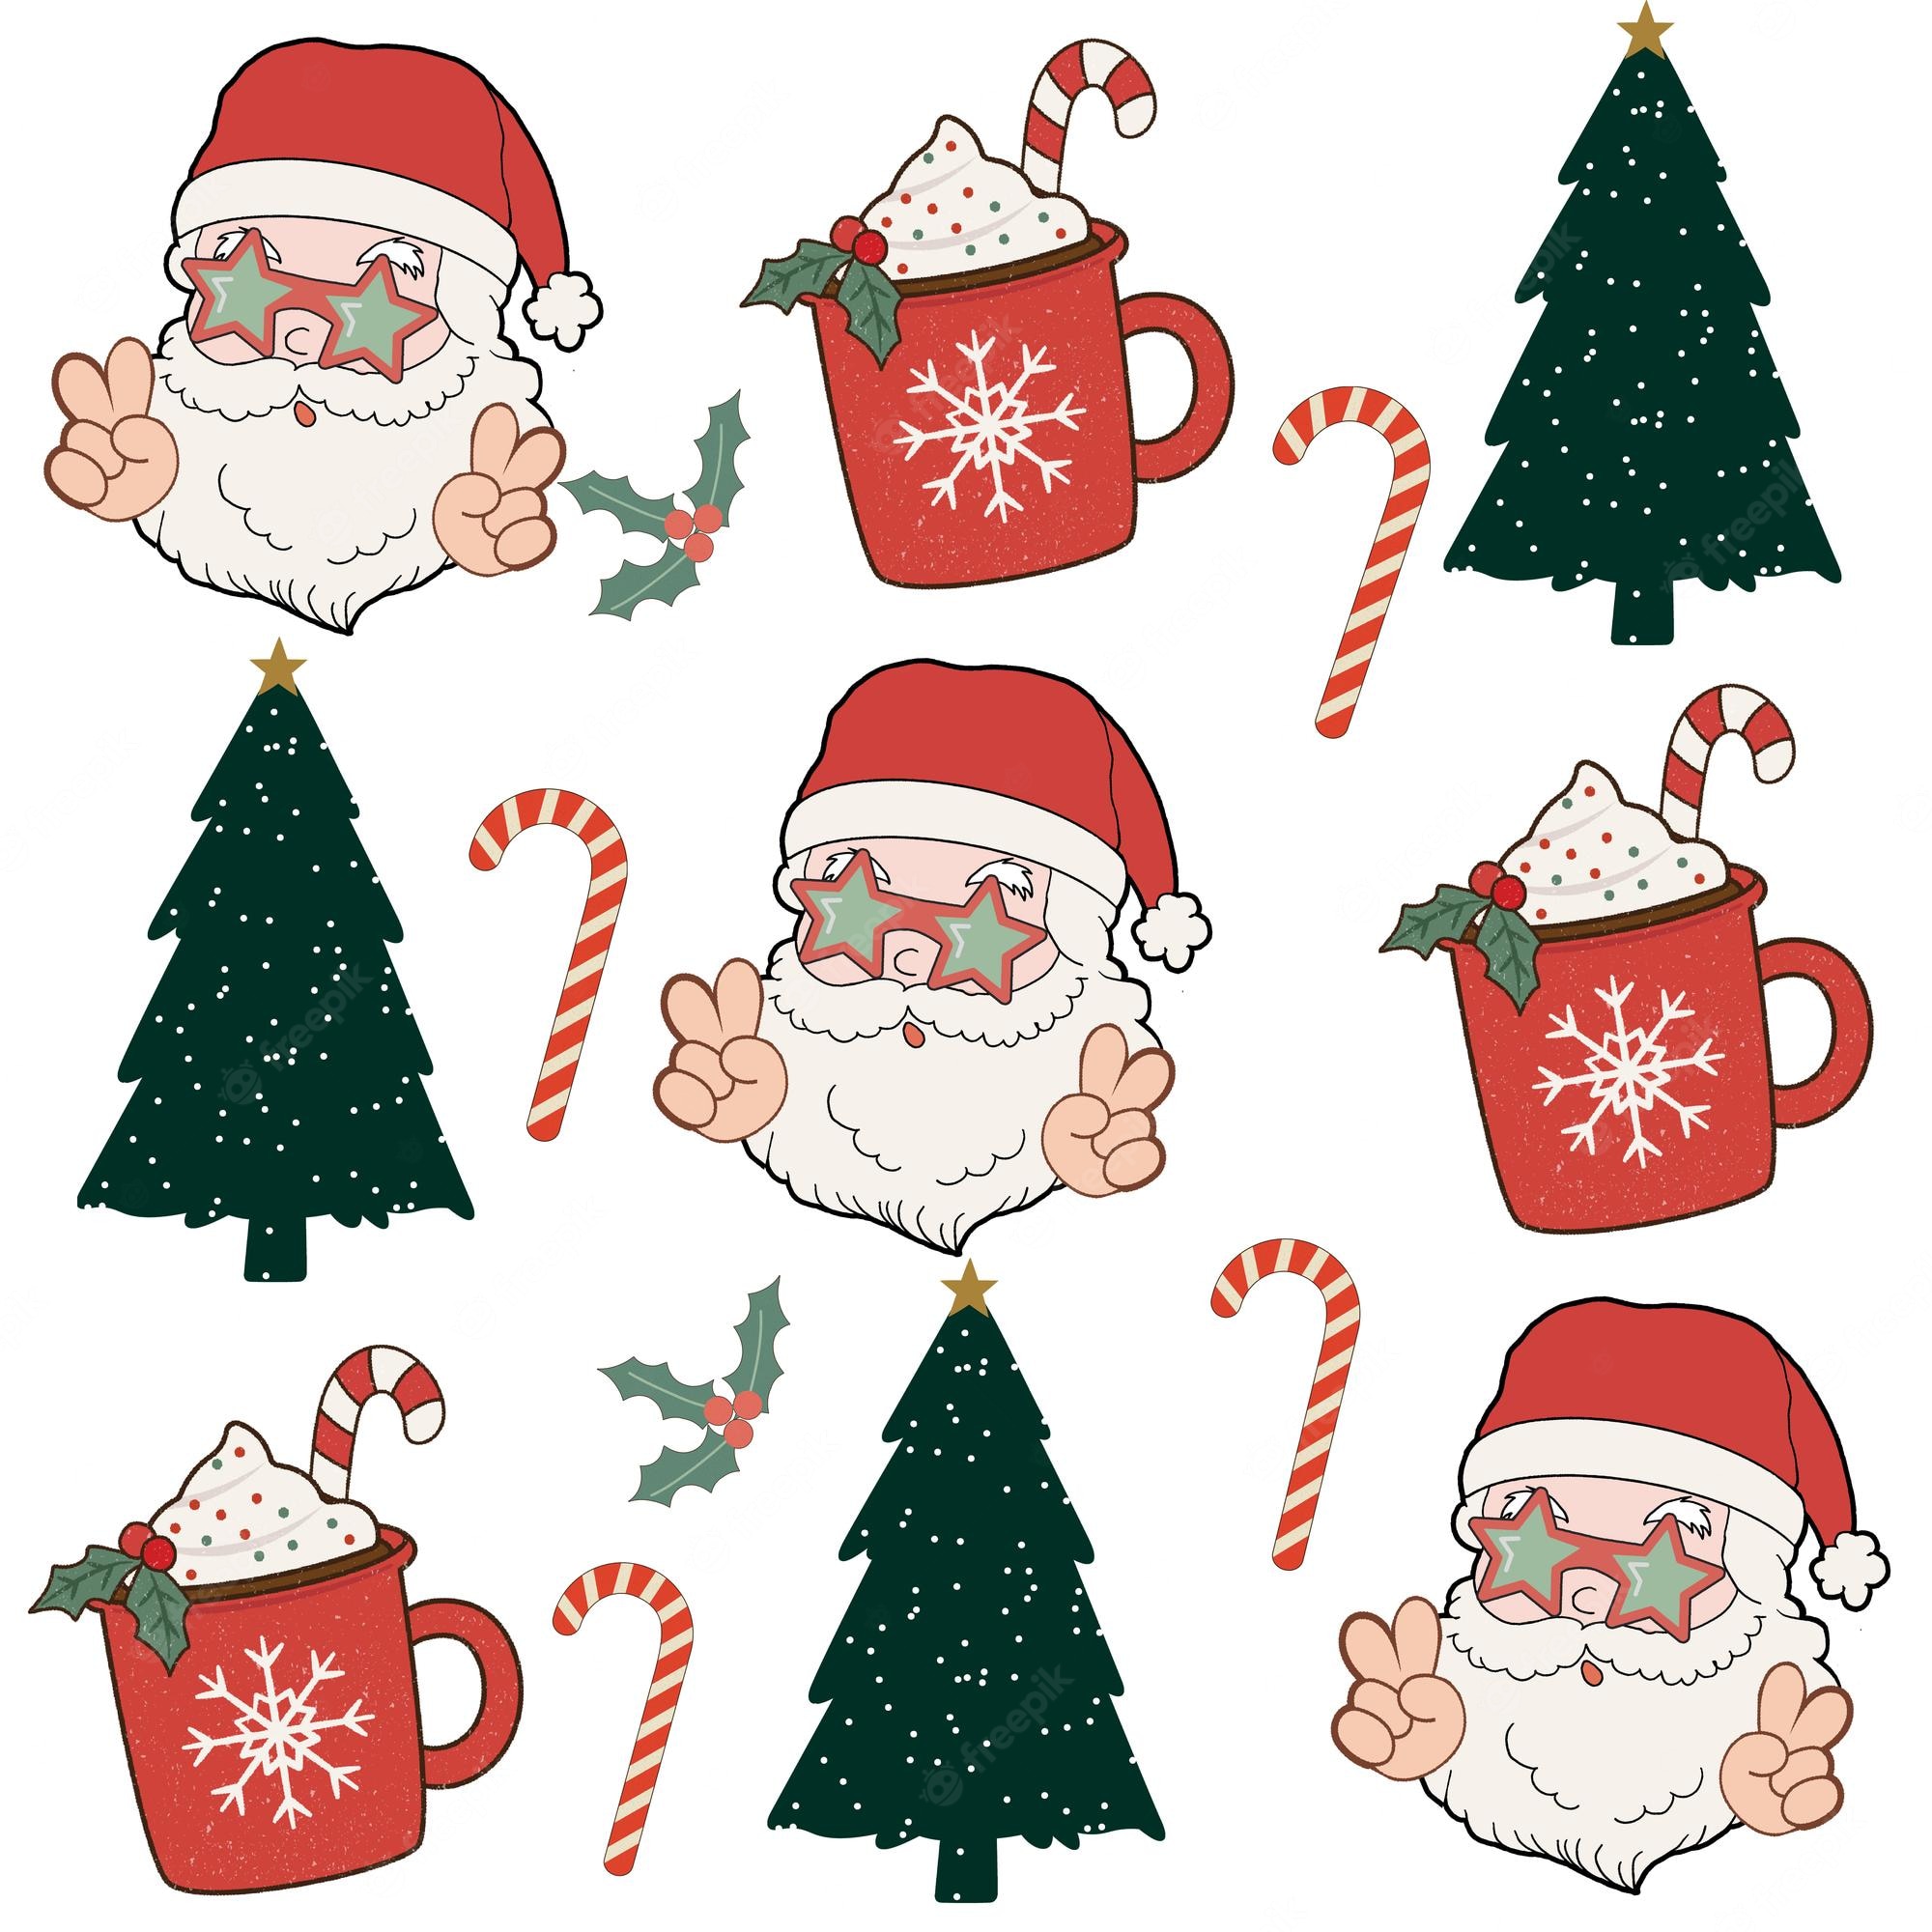 Christmas Decorations Clipart - Clip Art Of Christmas Decorations ...